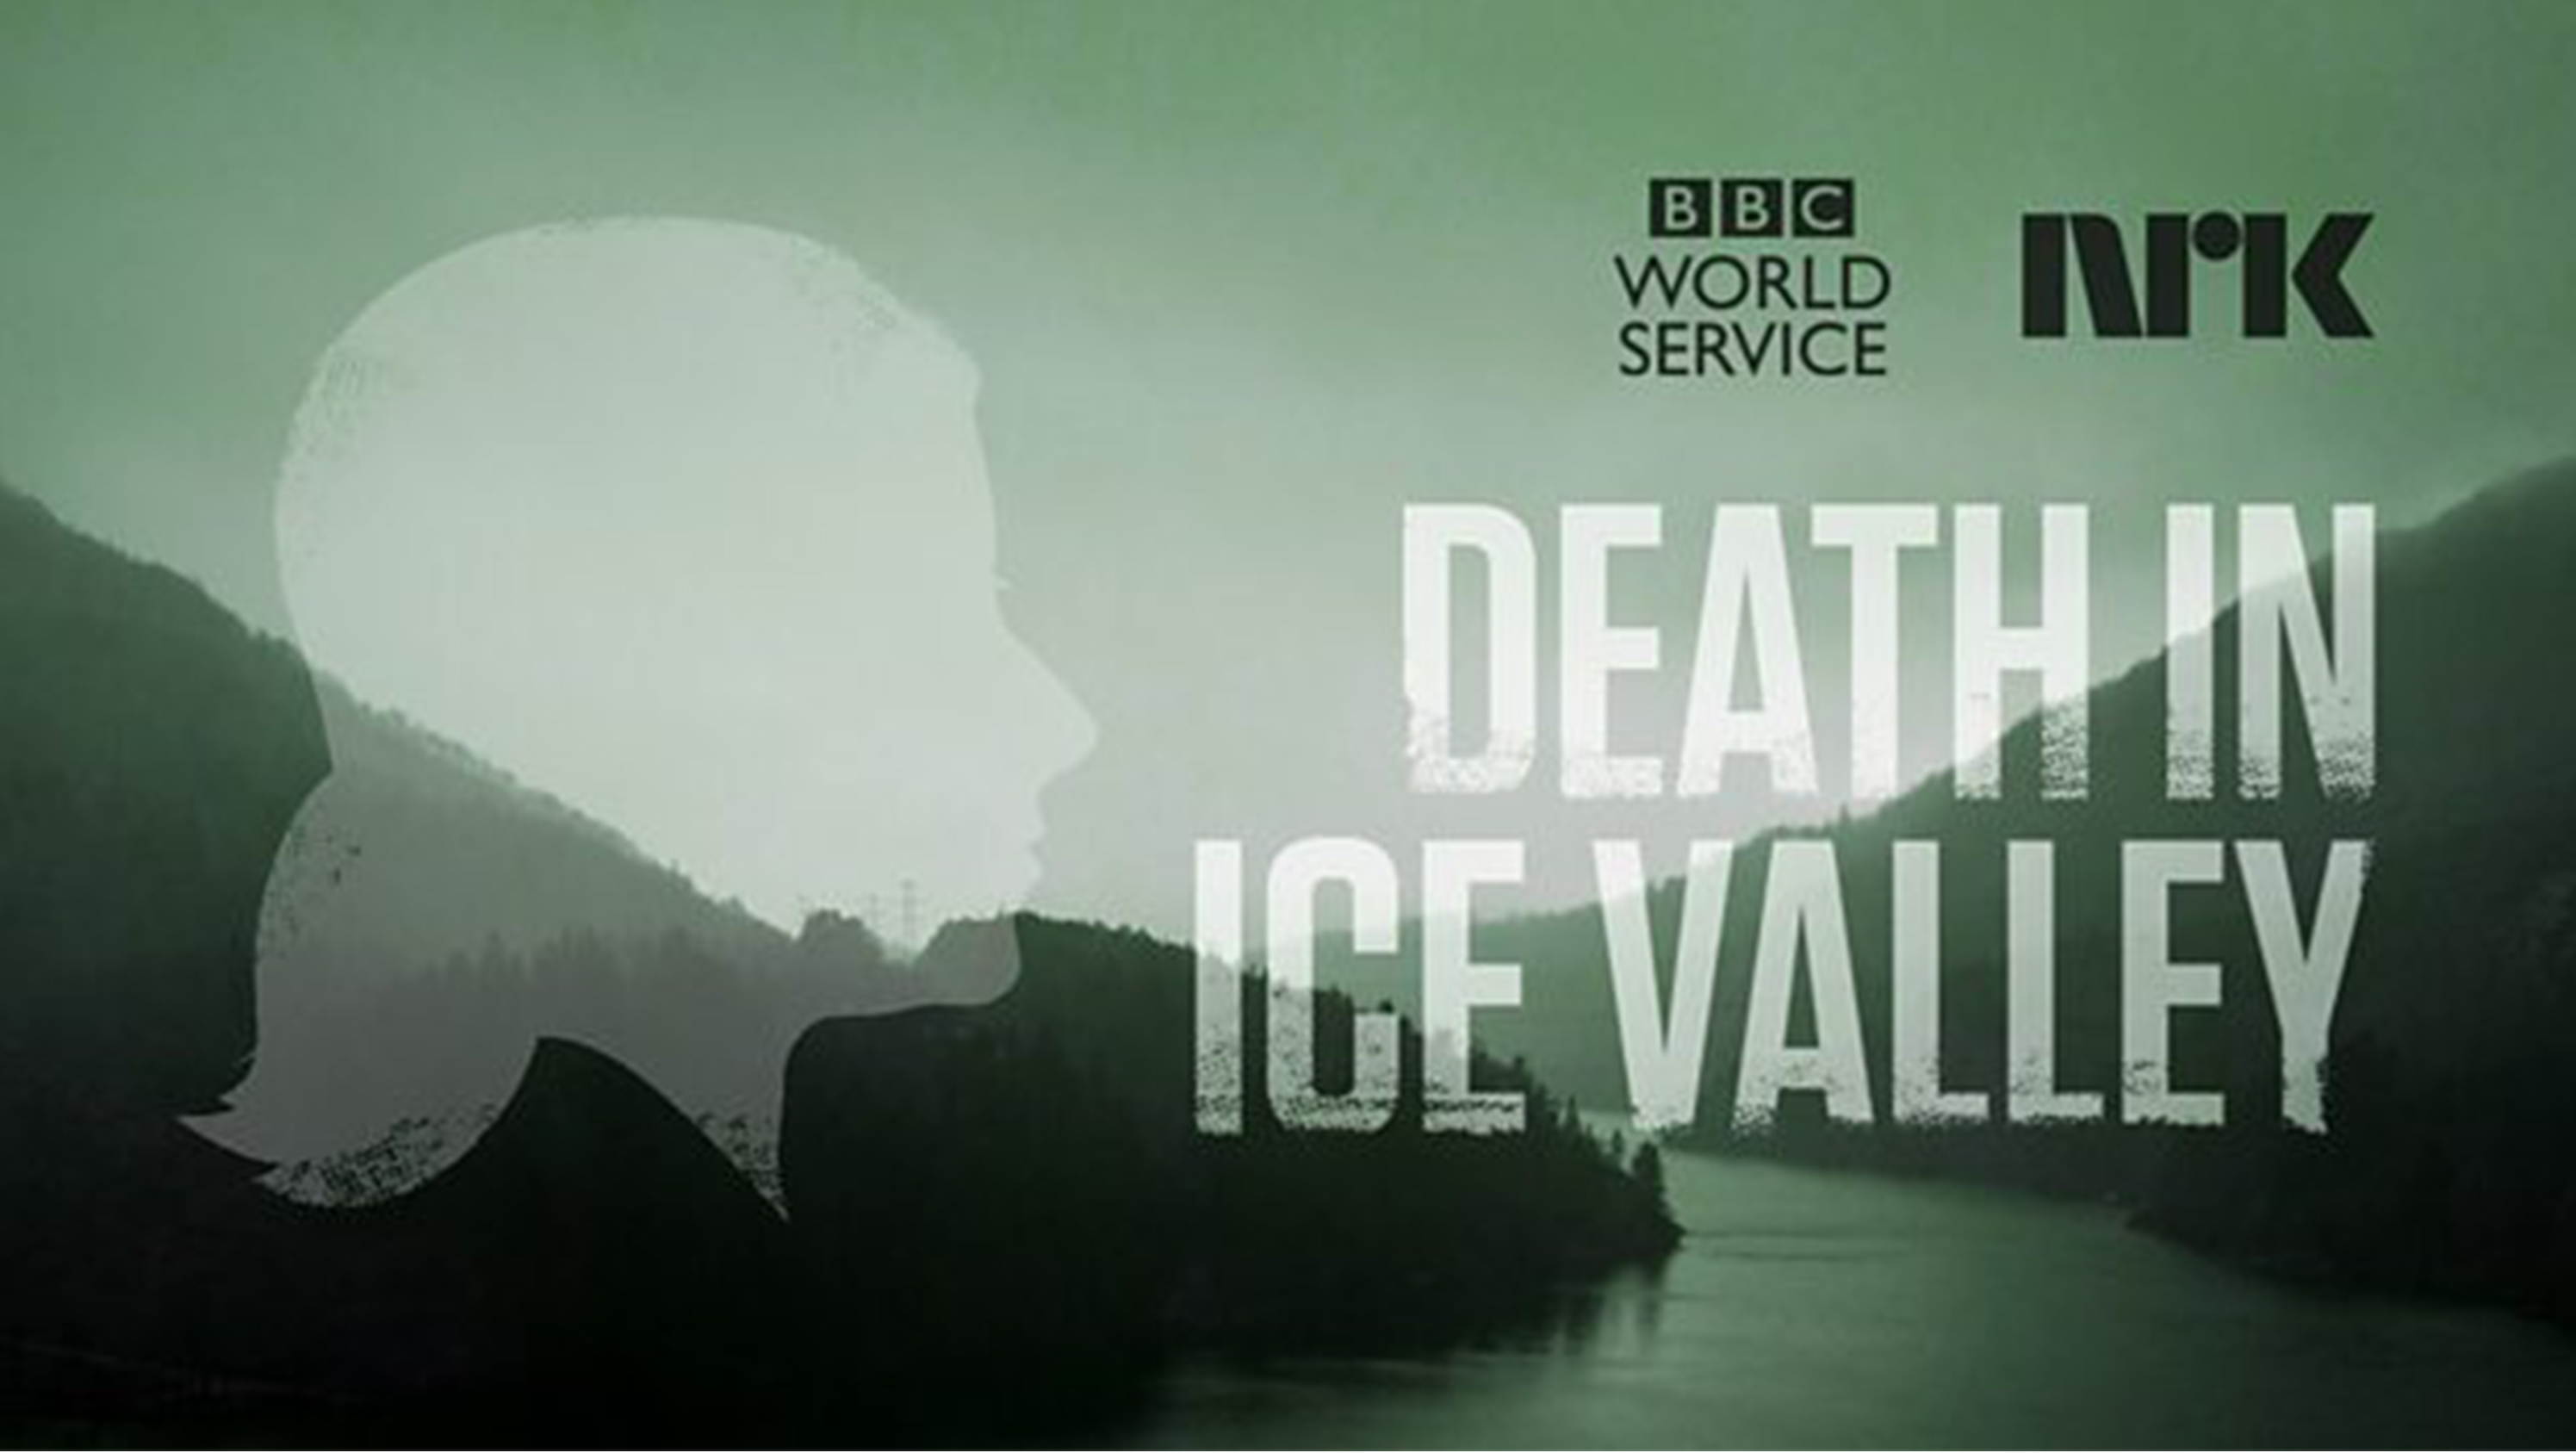 BBC World Service: Death in Ice Valley Podcast Series